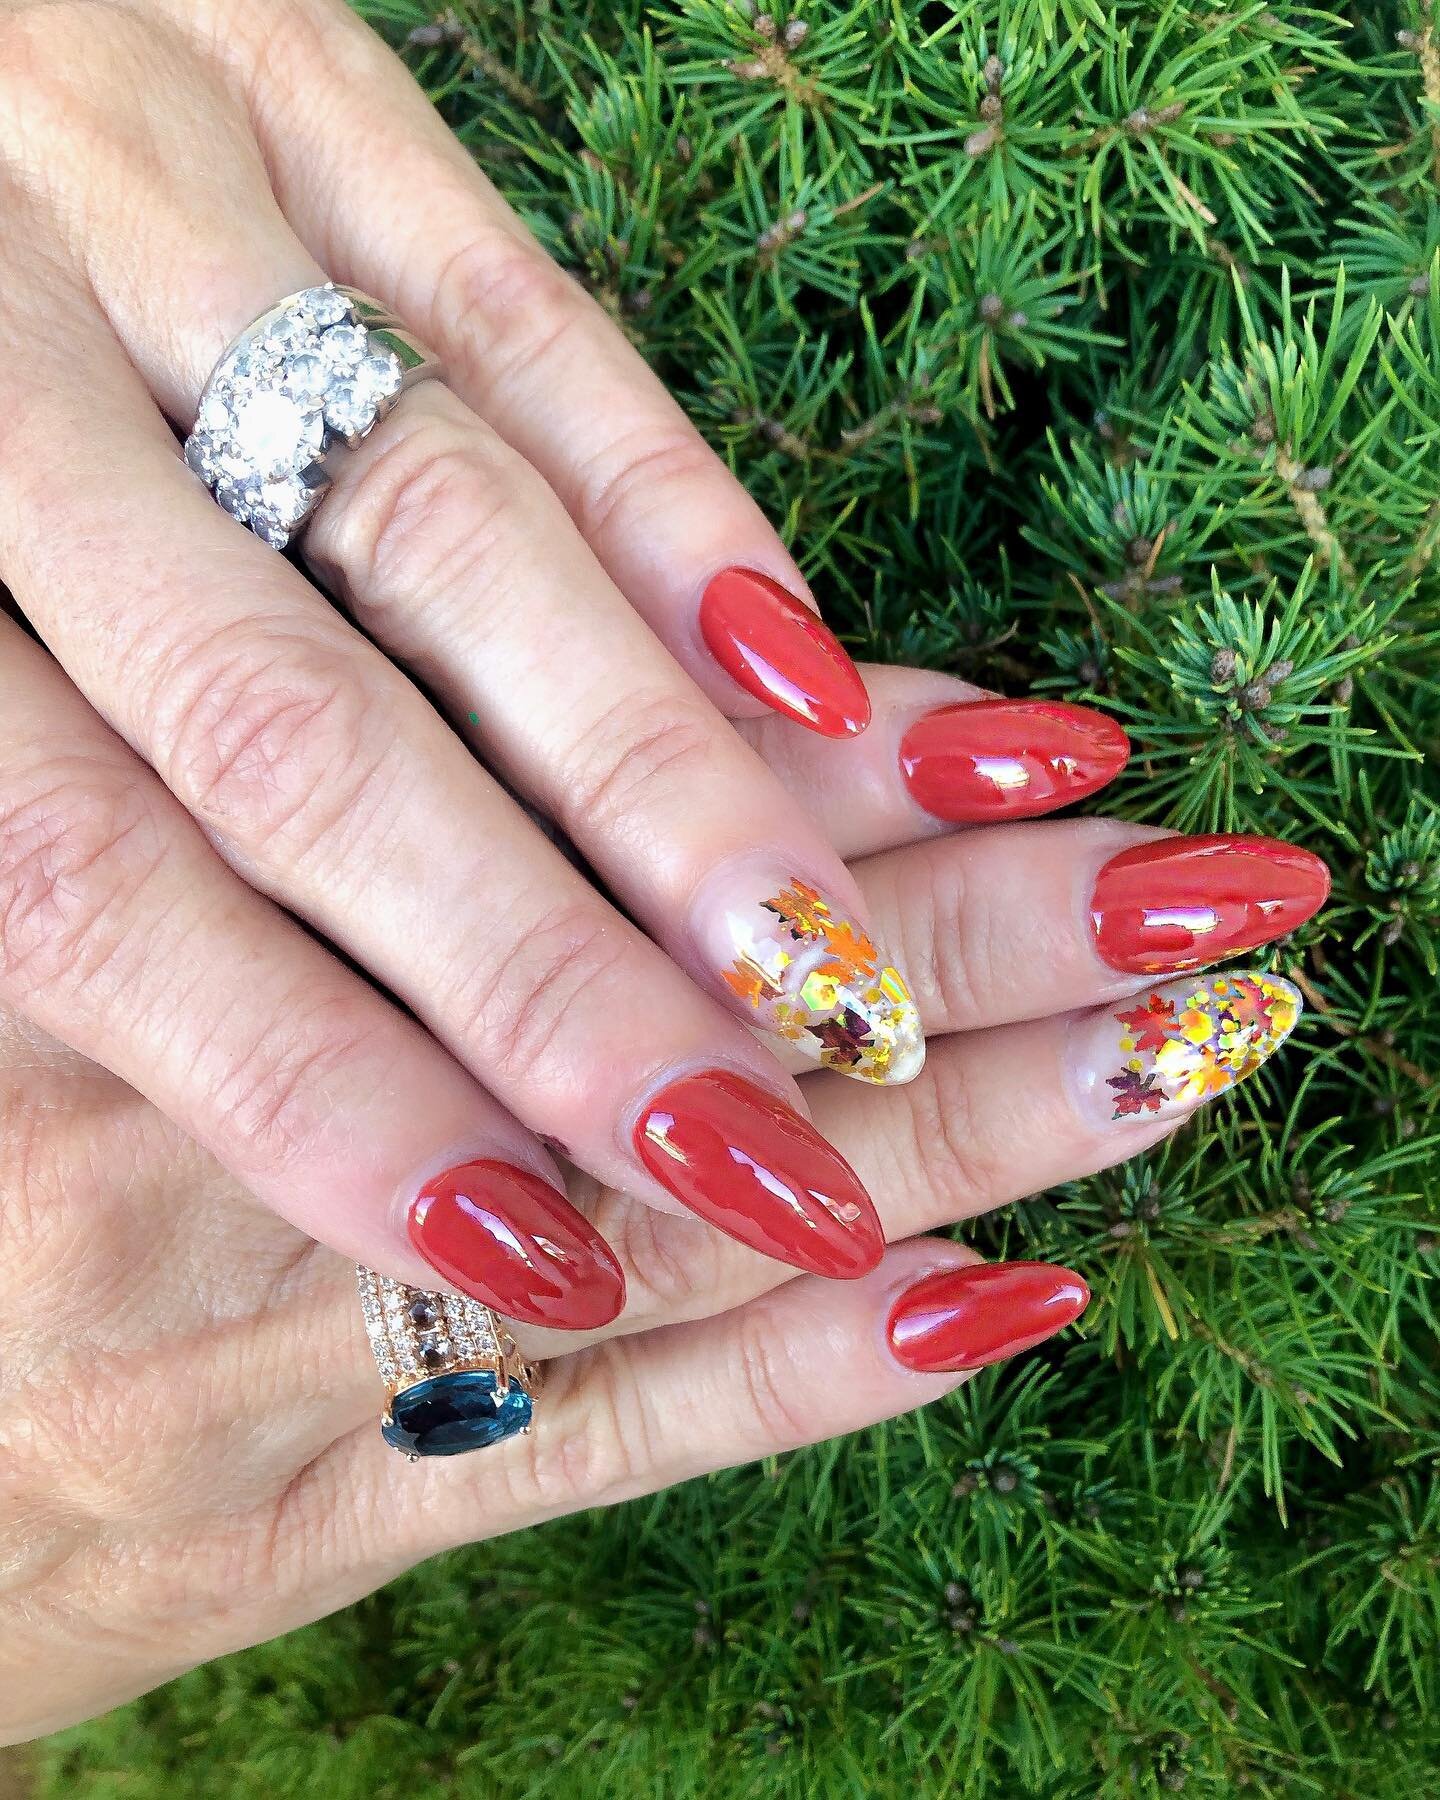 Our clients are loving fall designs this week! Book your manicure today 🍂🍁

This gorgeous set is by Lissette ✨

#delawarestylist #delawaretoday #beautyofdelaware #northdelaware #northdelawarehappeninglist #pikecreekde #wilmingtonde #hockessinde #na